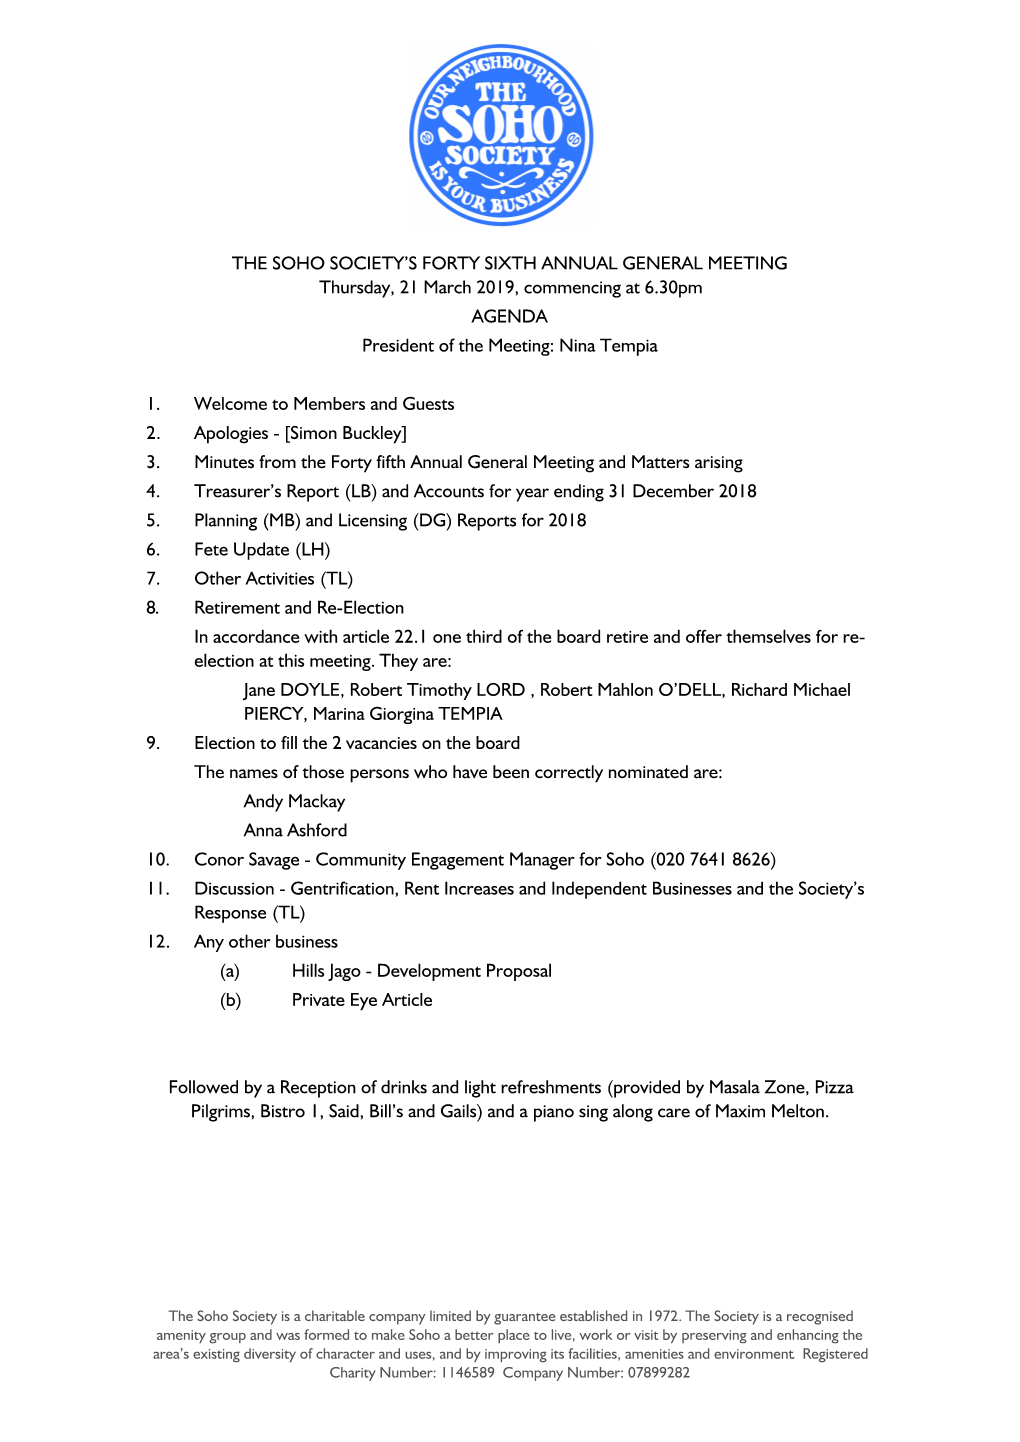 Draft AGM Agenda 2019.Pages